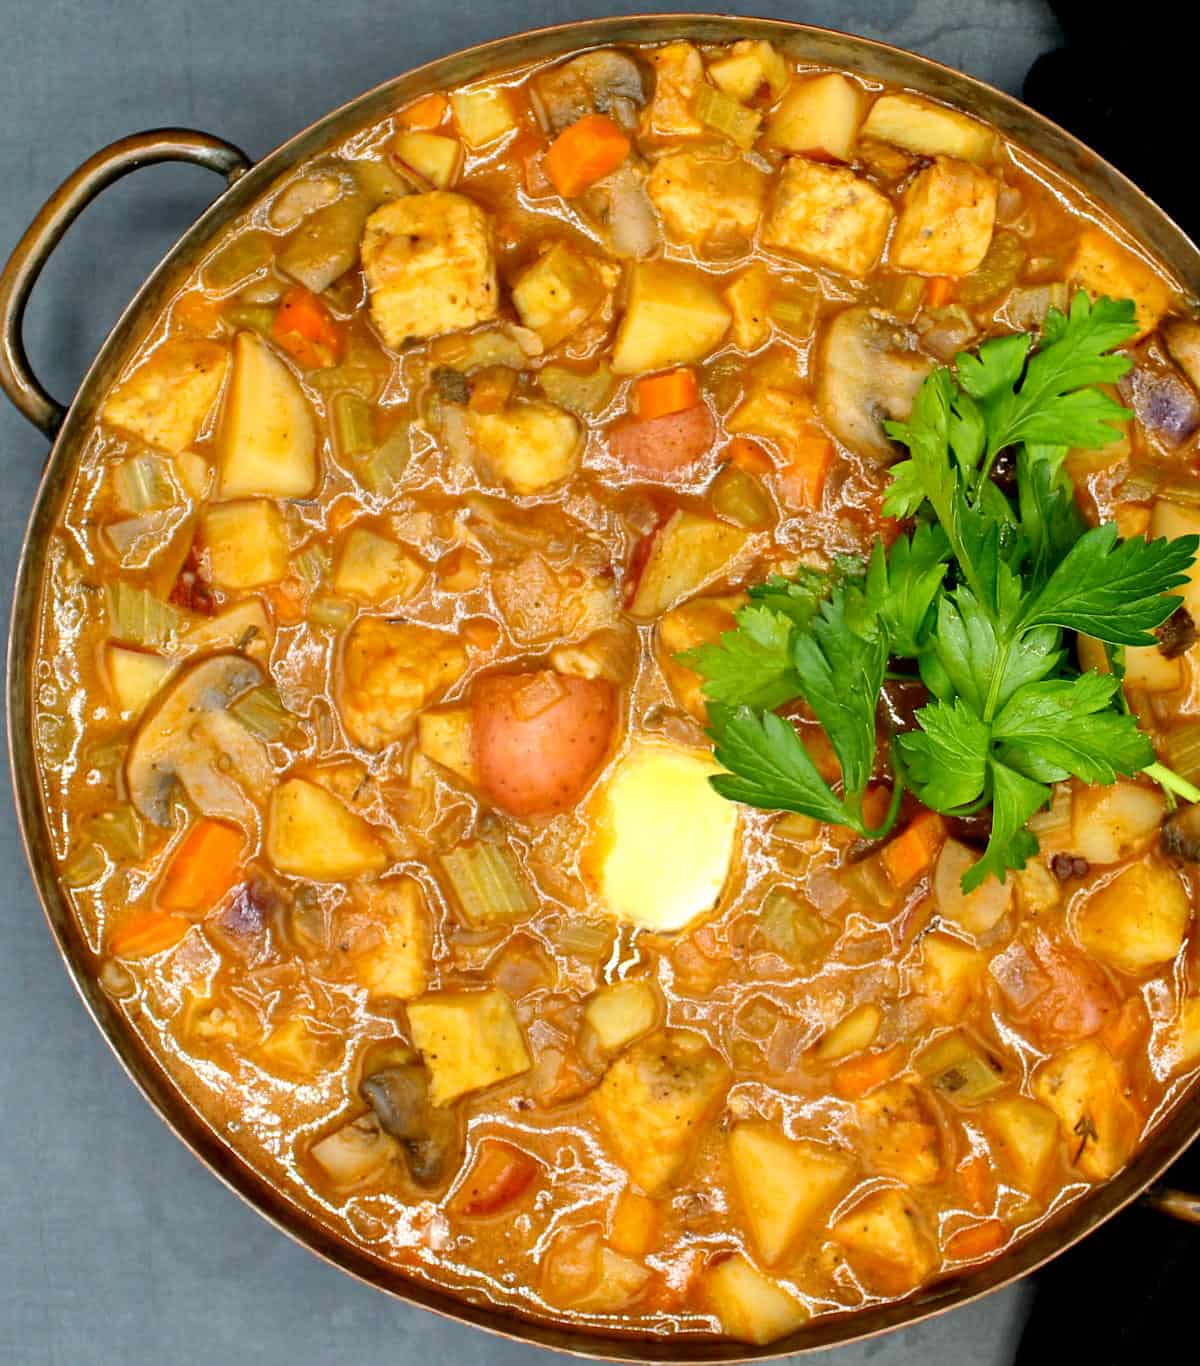 Overhead shot of a copper serving dish with vegan veggie-packed stew with tempeh, carrots, potatoes, onions, celery and carrots and a garnish of parsley.